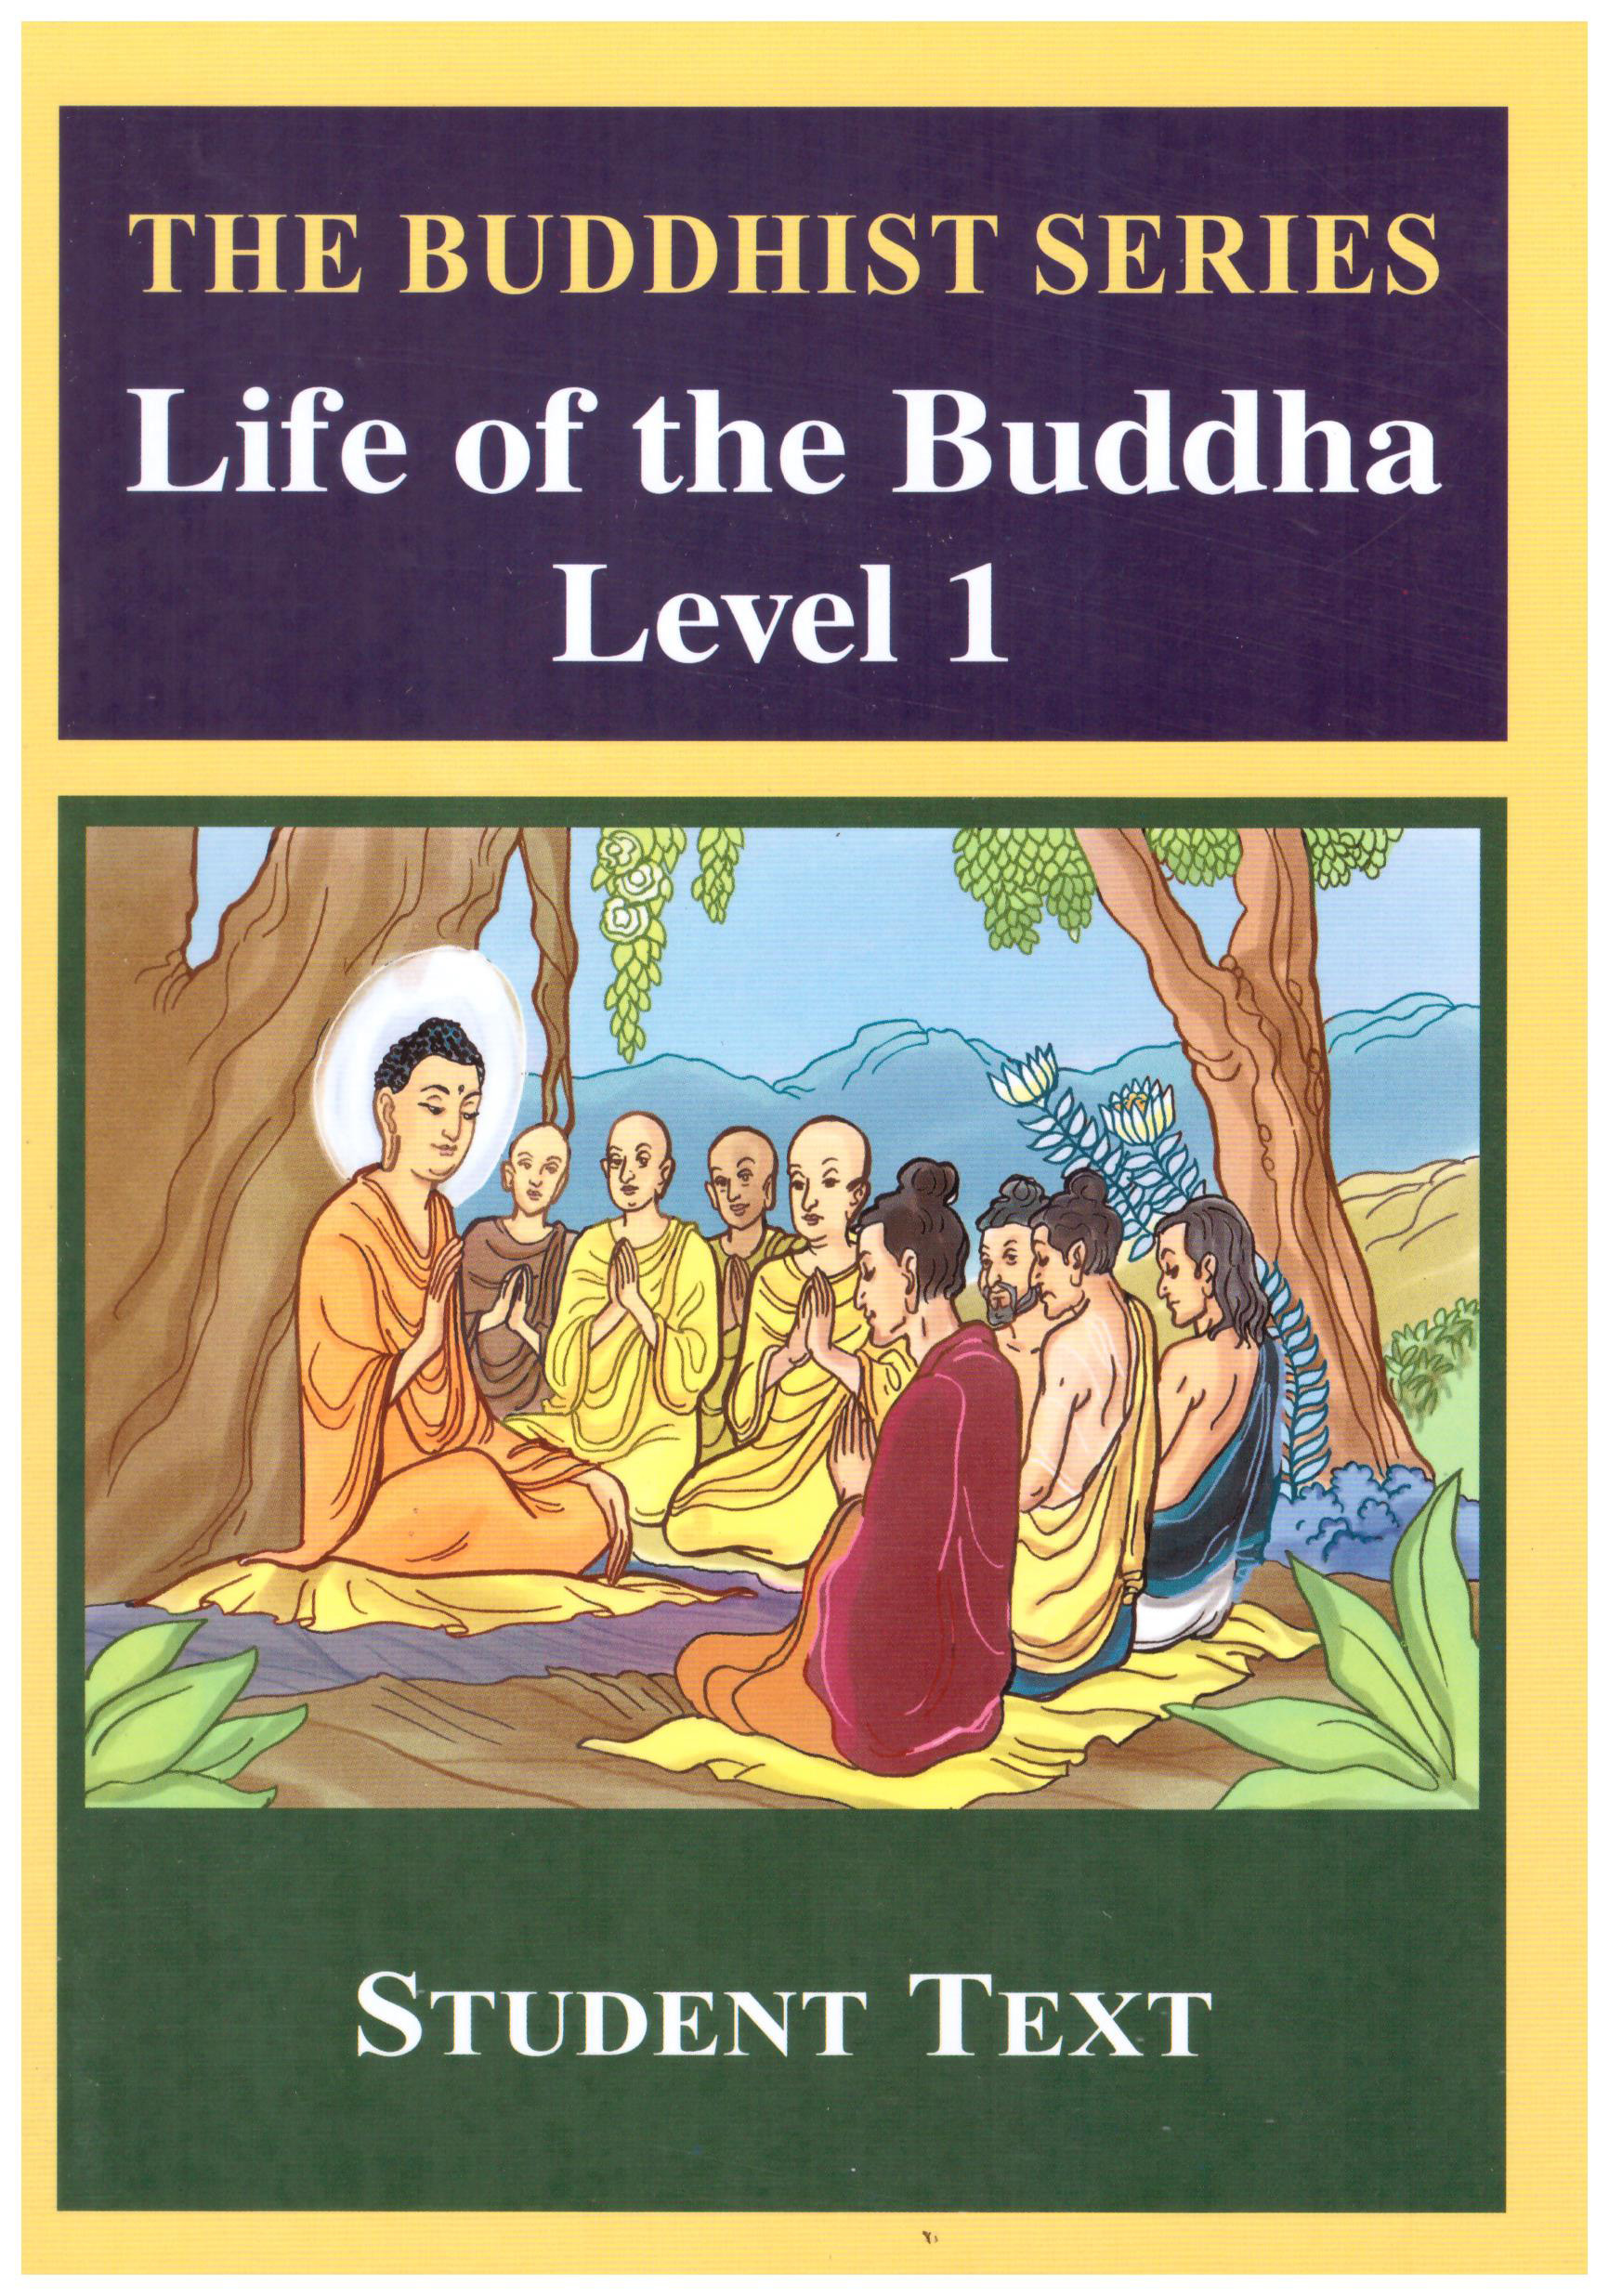 The Buddhist Series Life of the Buddha Level 1 Student Text